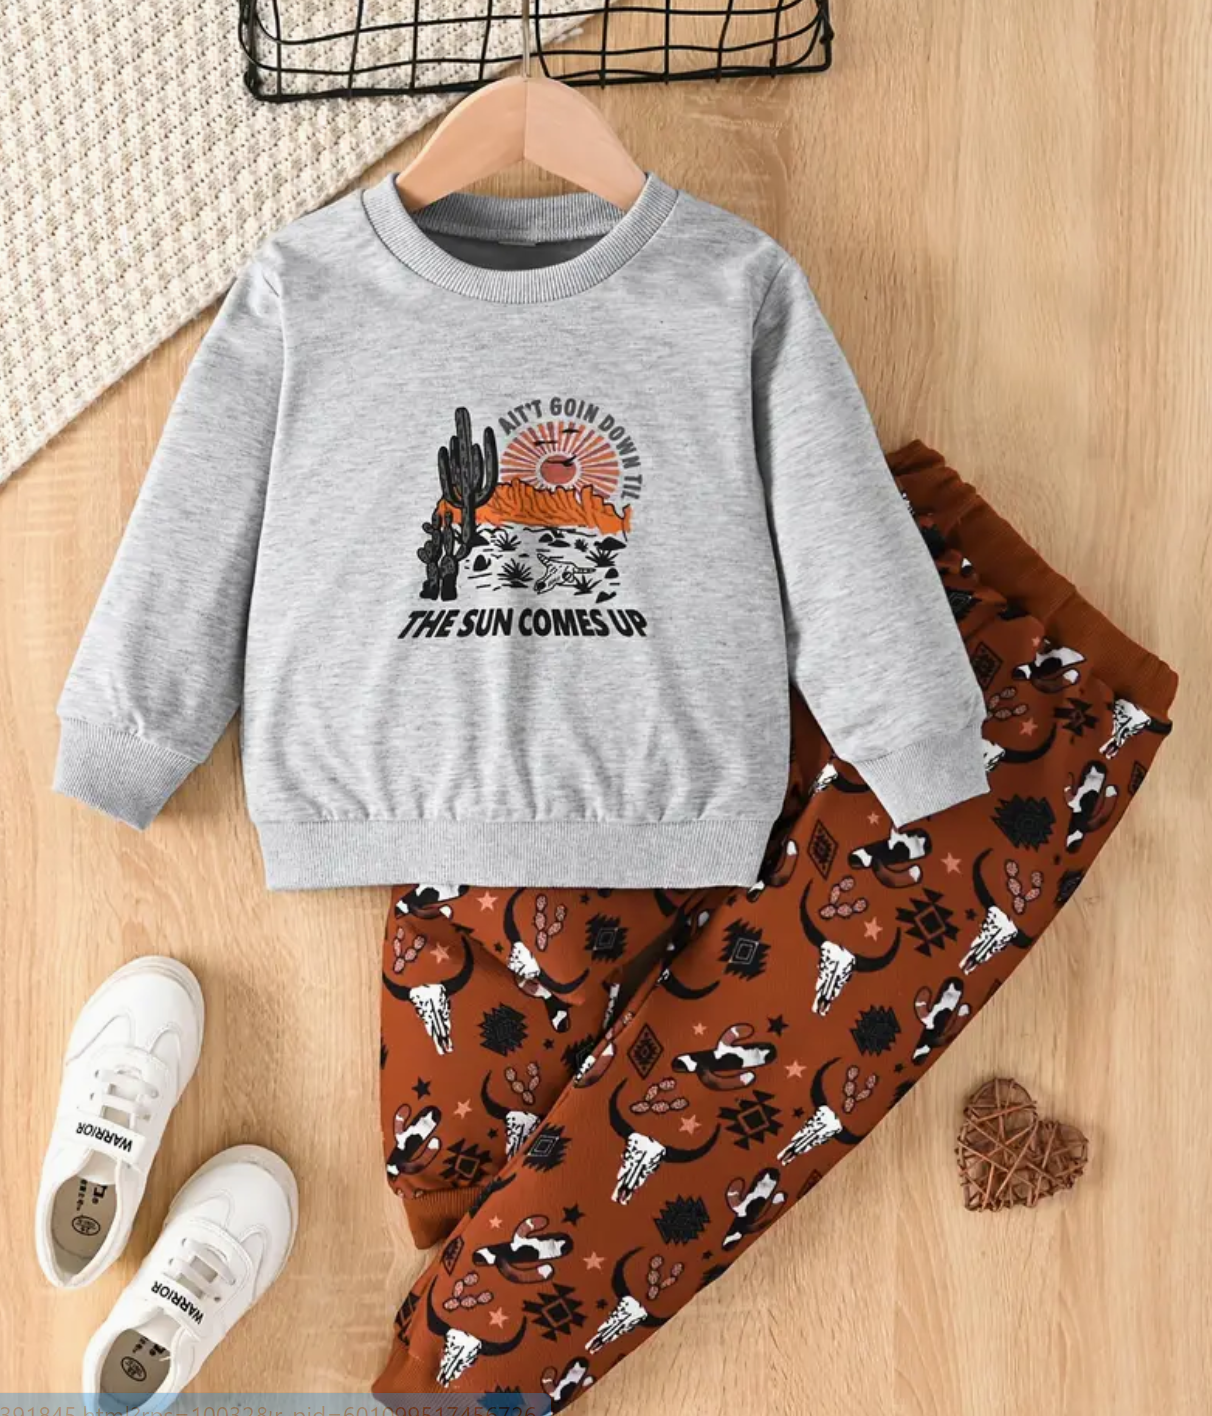 Ain't Going Down Until The Sun Comes Up Sweater Outfit